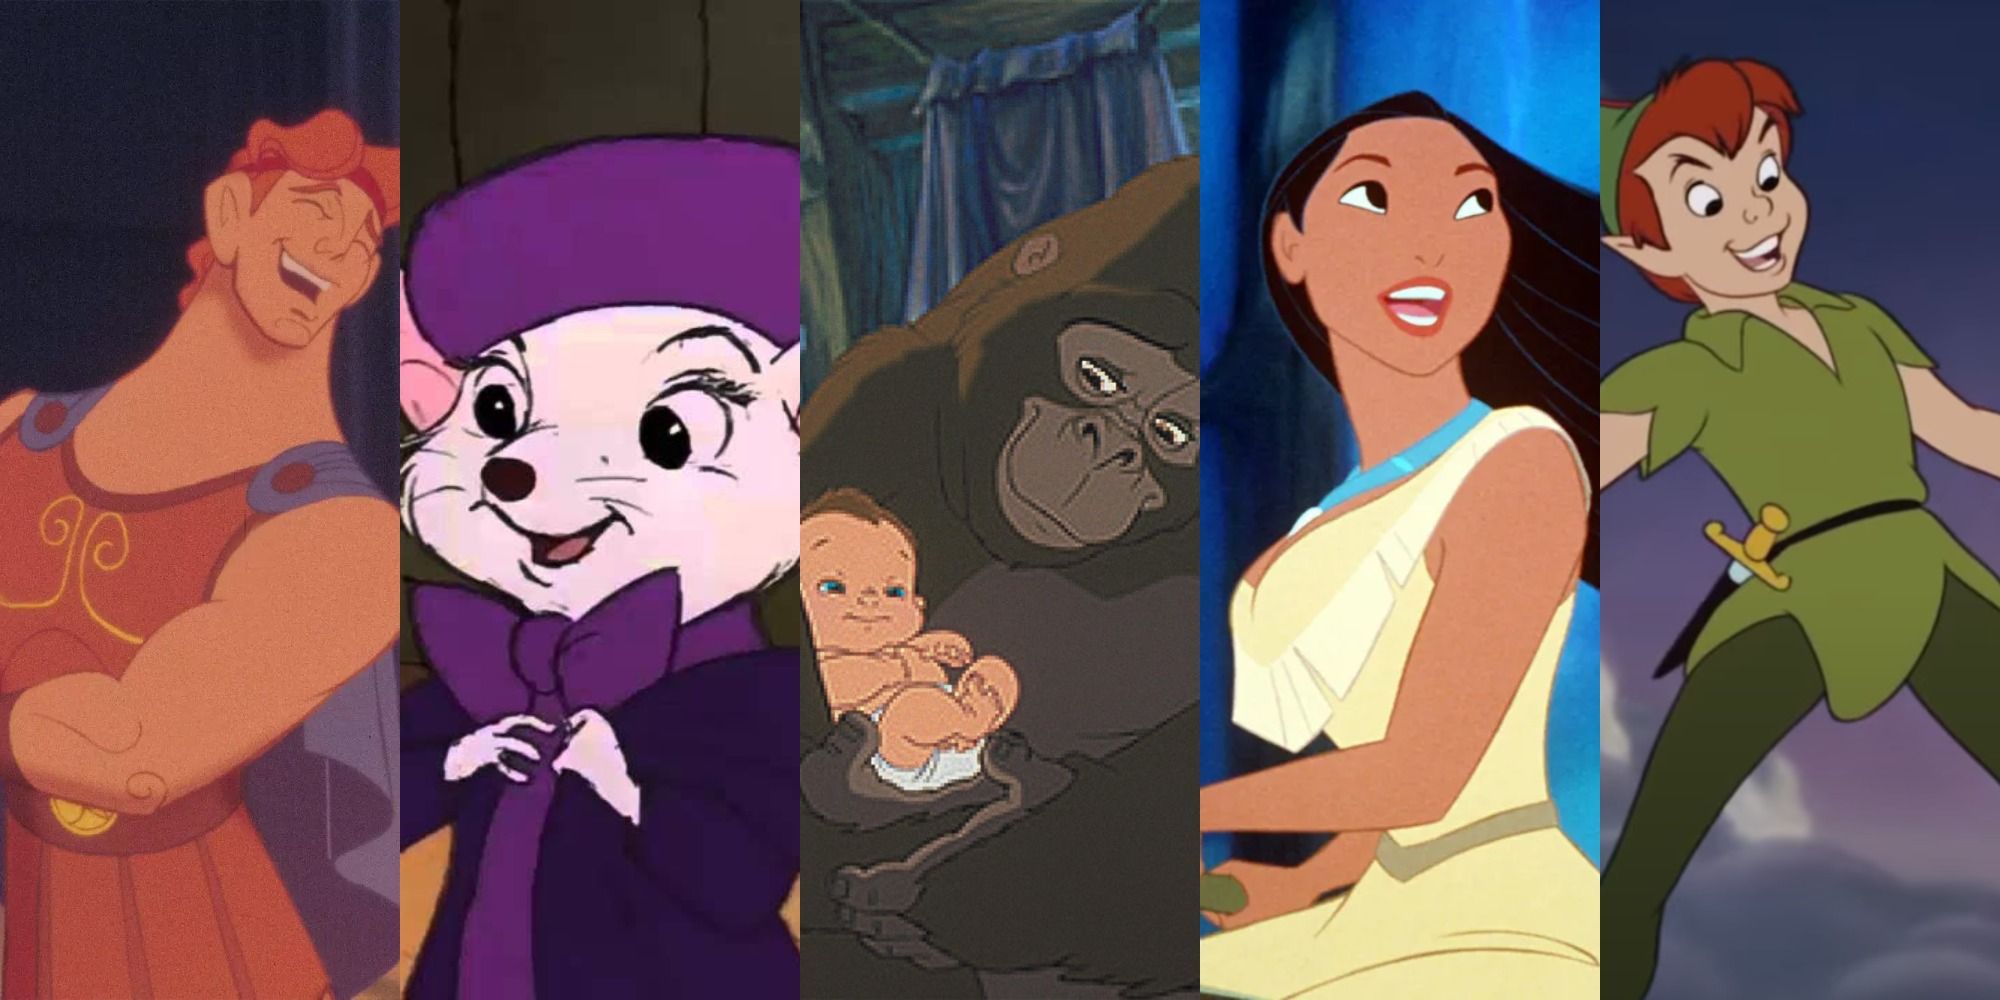 10 Great 'Disney' Movies Based on Stories That Aren't Fairy Tales